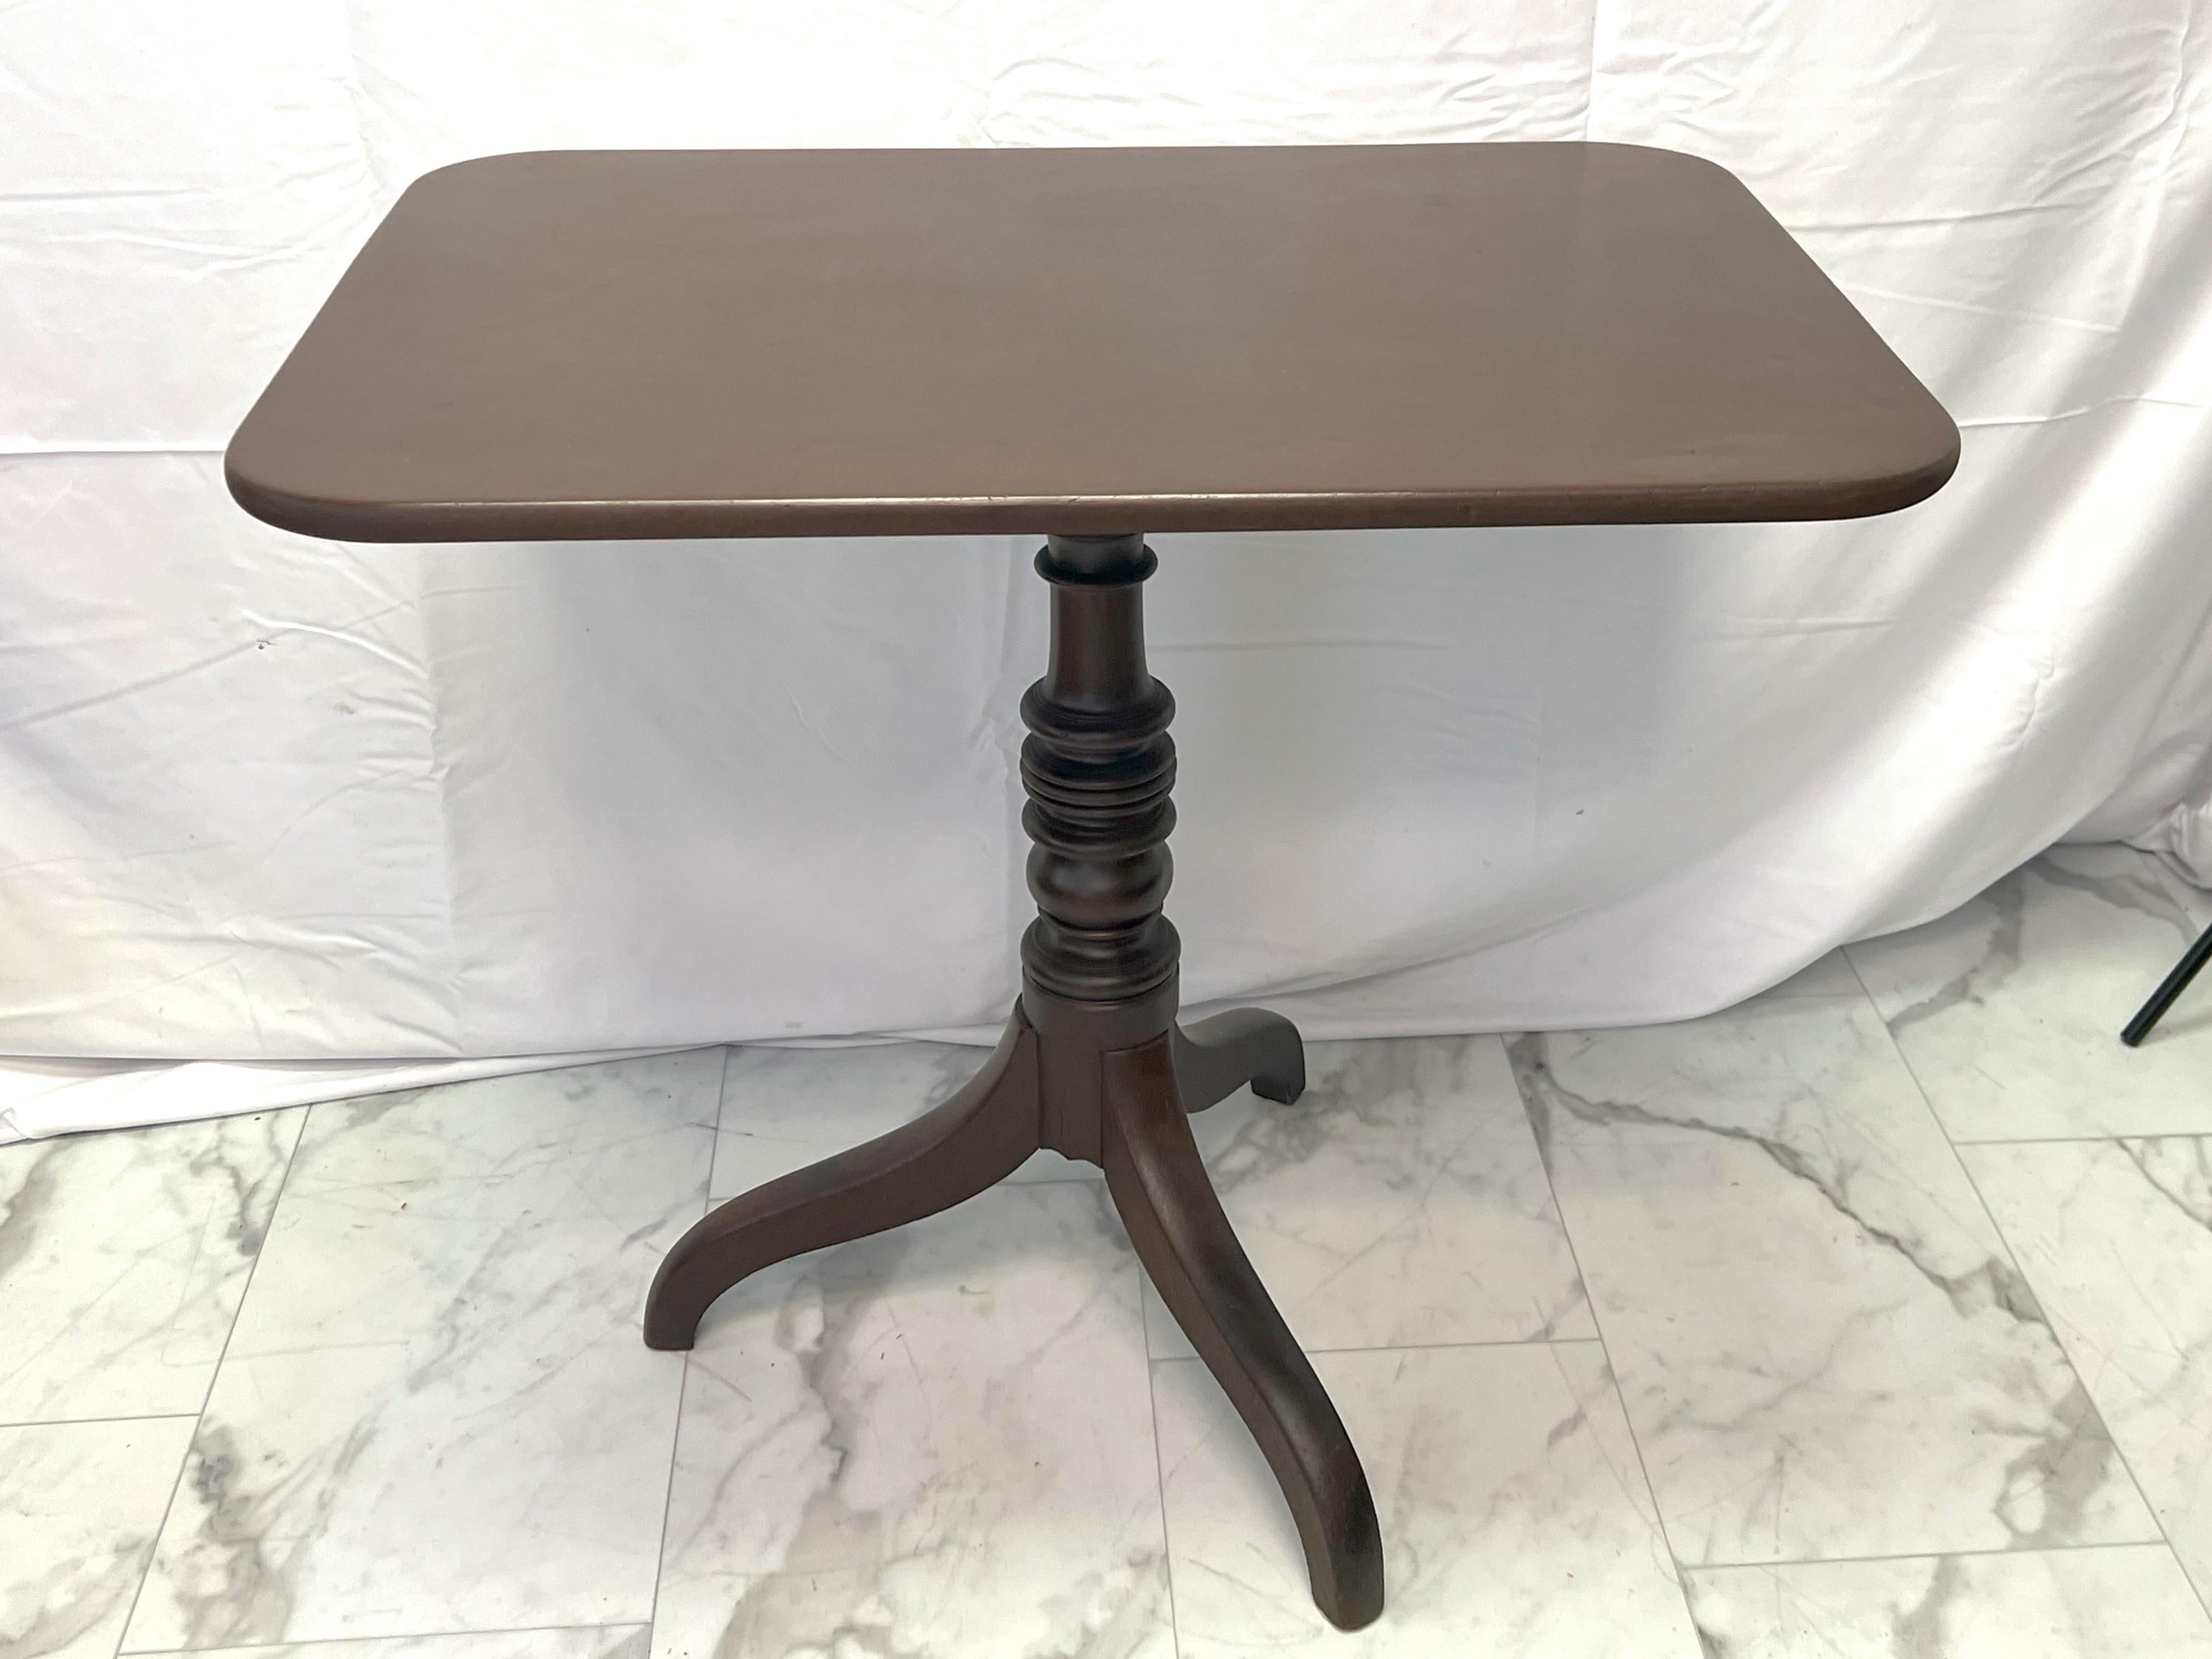 Early 19th-century tilt-top occasional table circa 1810. The rectangular top with rounded corners. Standing on a turned stem and supported by 3 scrolling legs. The tilting mechanism allows easier storage. Ideal for use as a lamp or side table. Minor